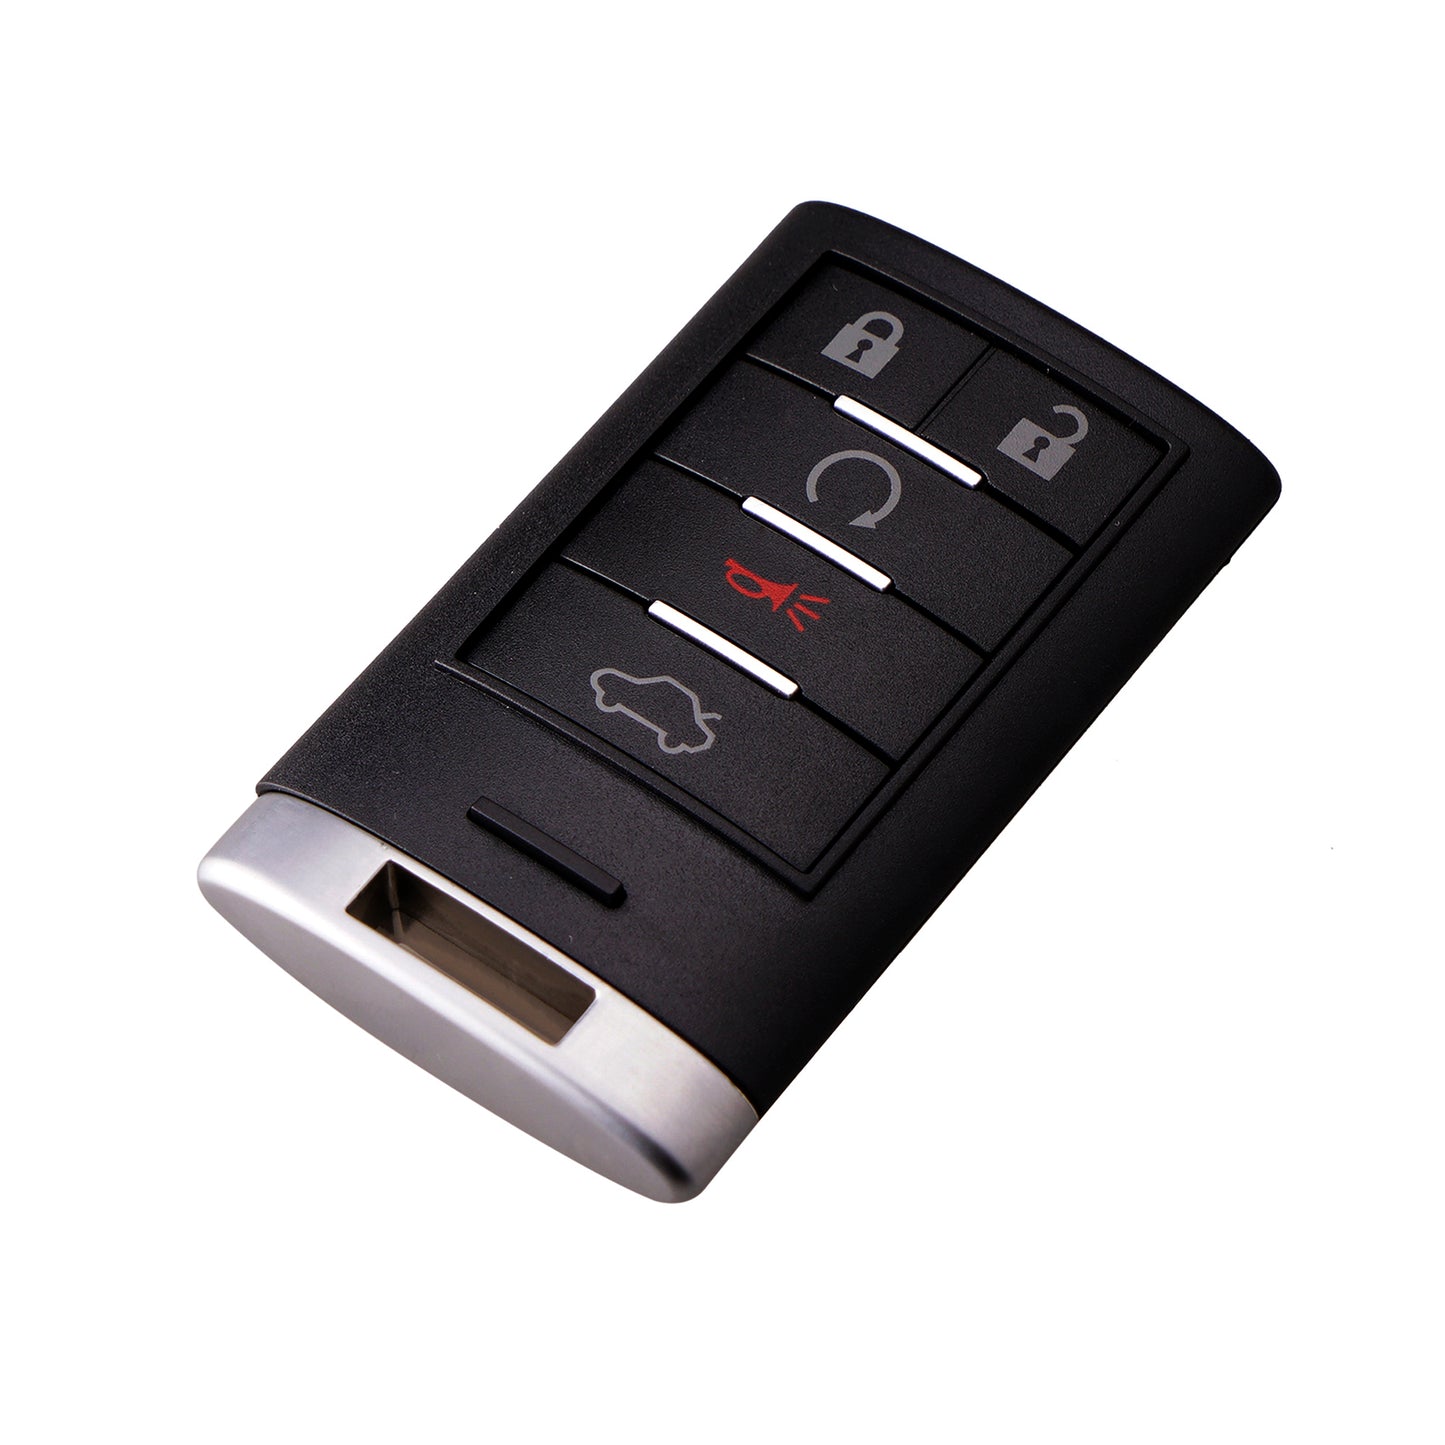 5 Buttons 315MHz PCF7952 Chip M3N5WY7777A Keyless Entry Car Fob Remote Key For 2008-2015 Cadillac CTS STS SKU : J004